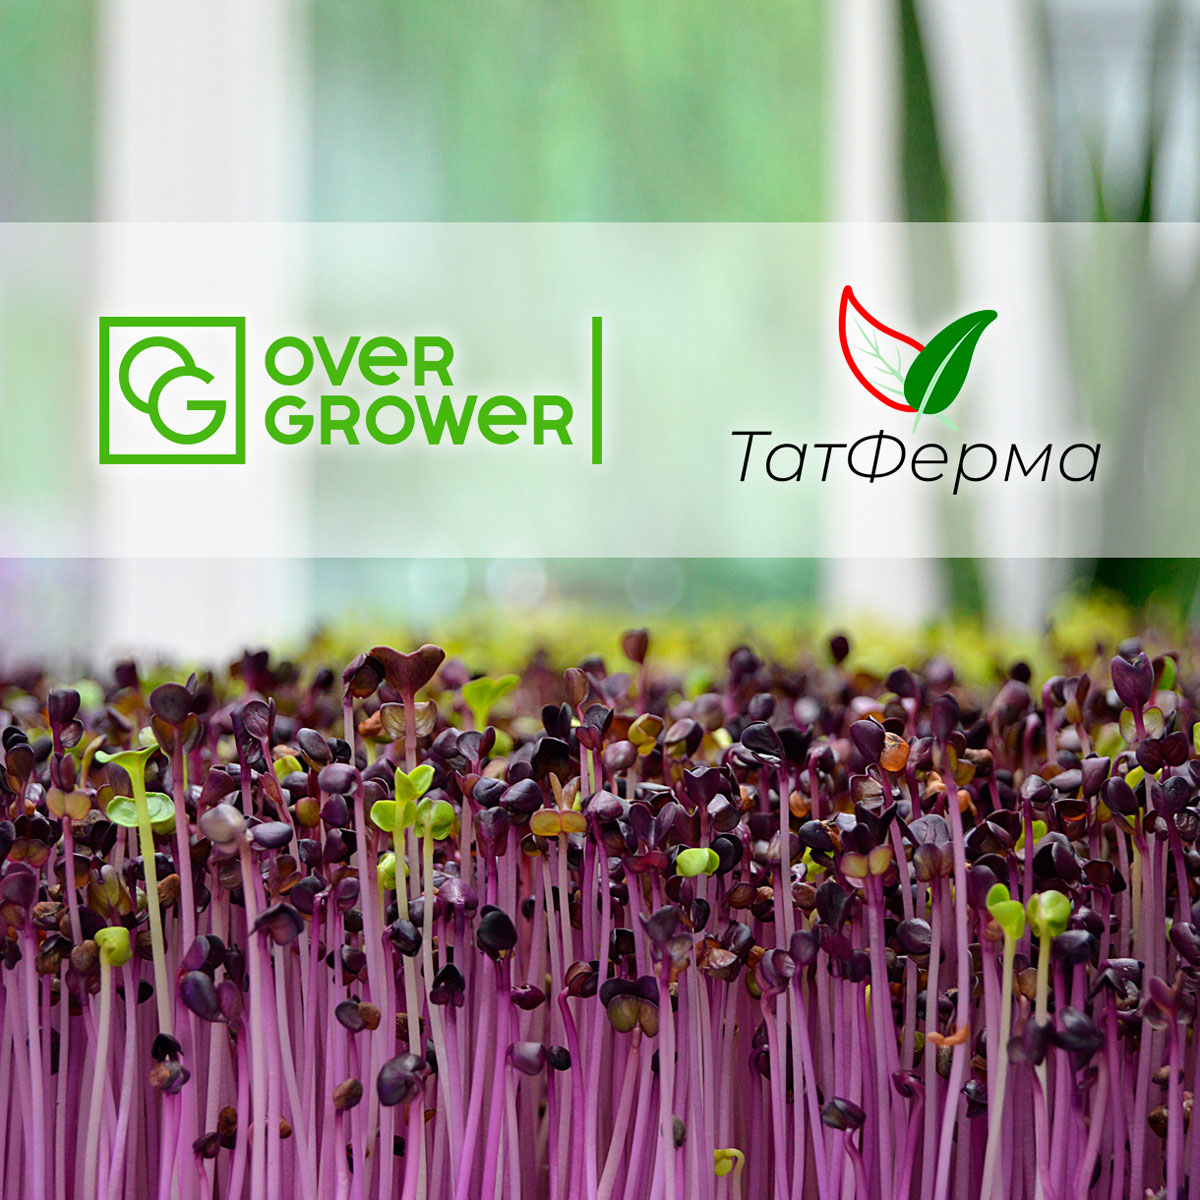 The Partnership Agreement with TatFerma executed!